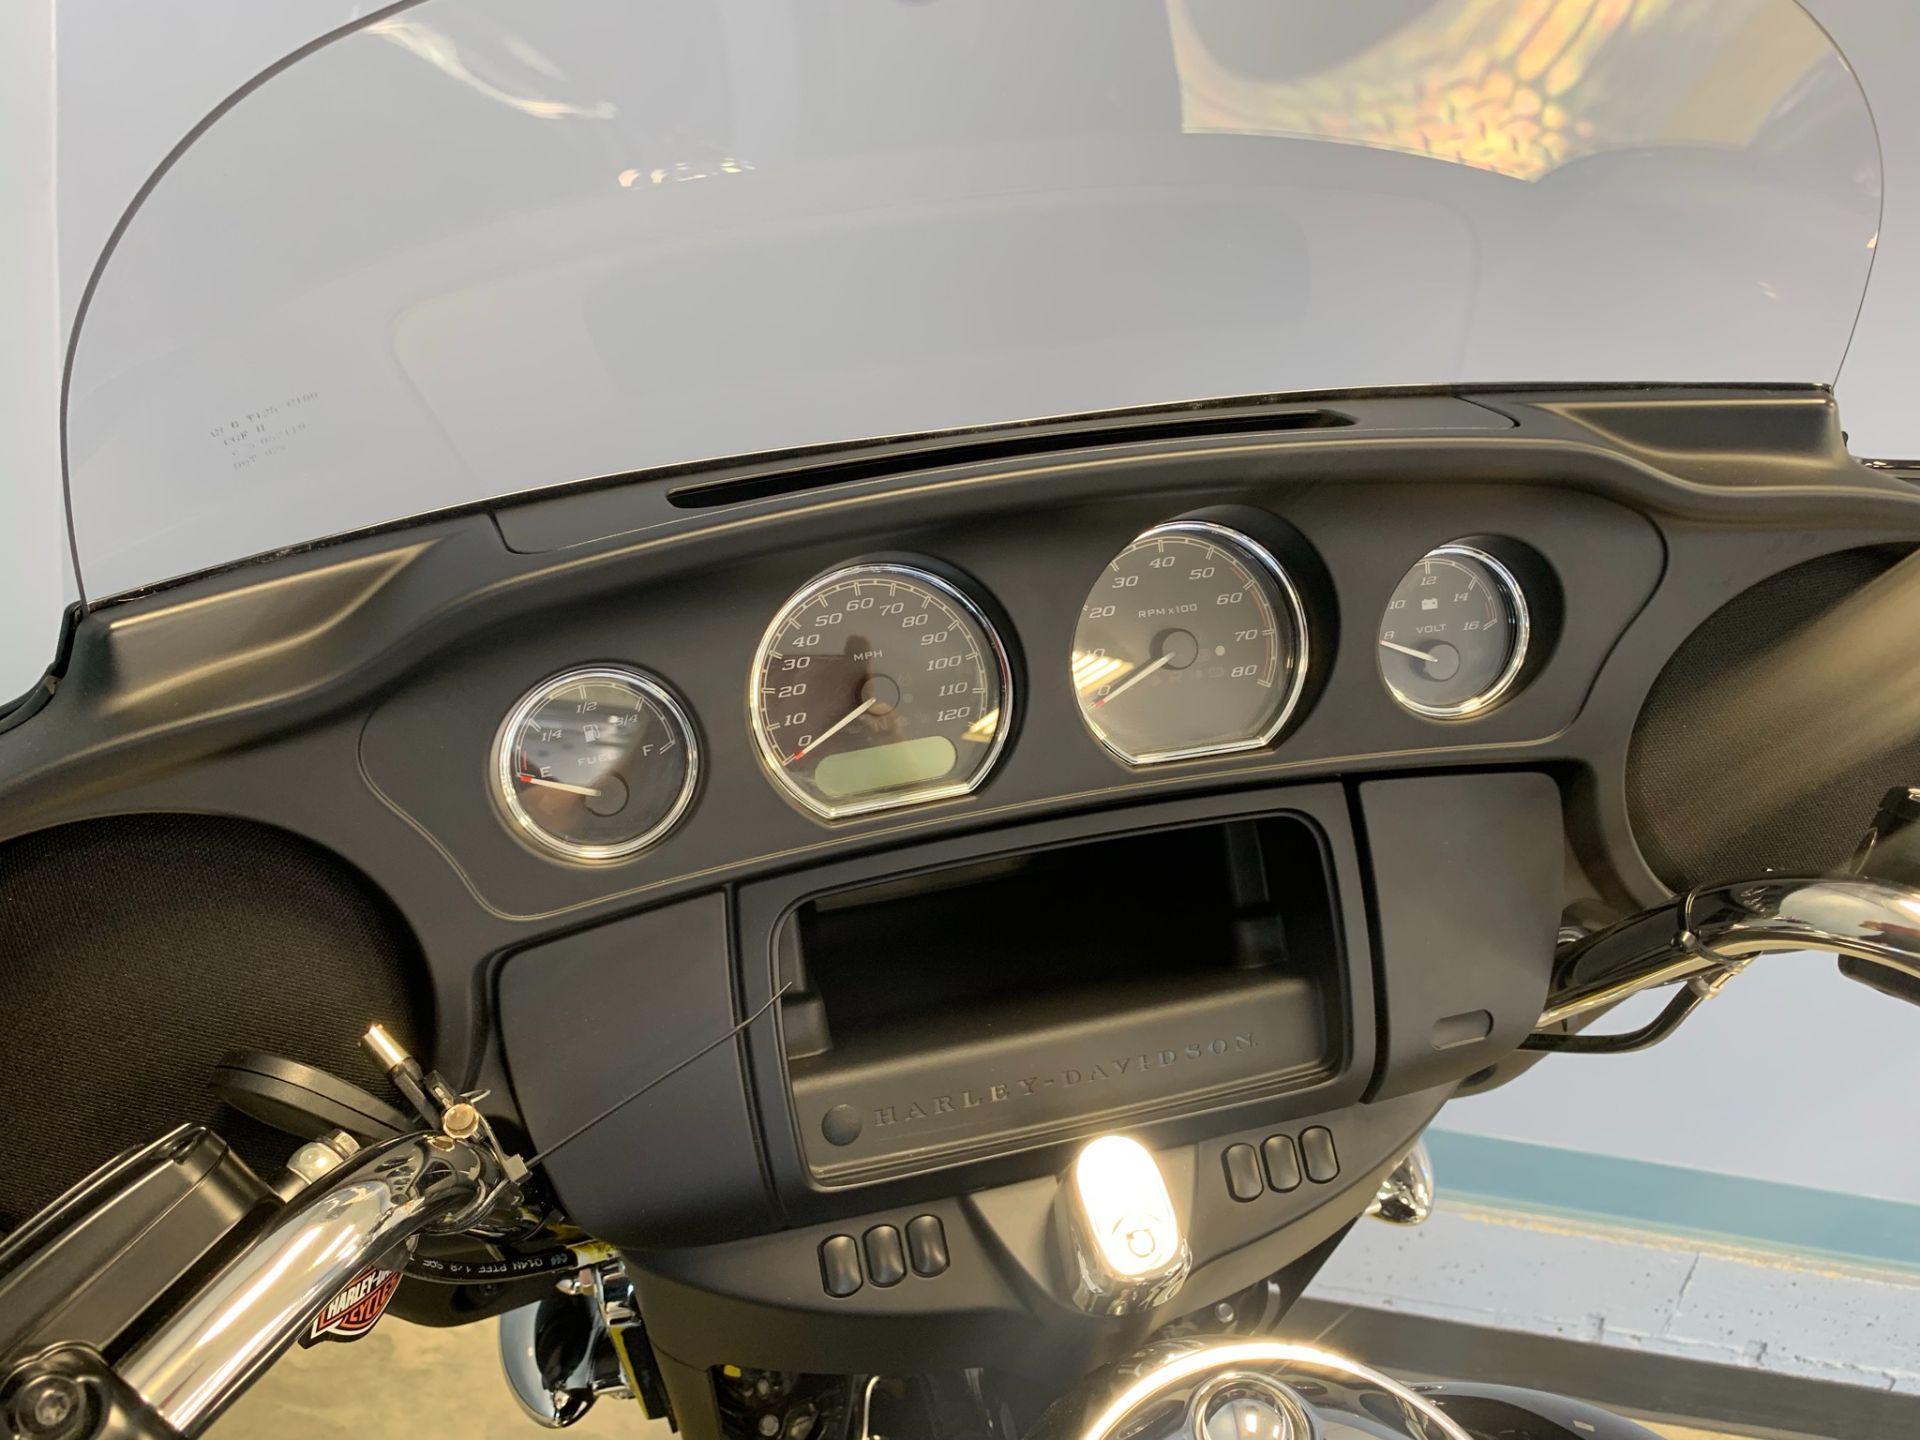 2020 Harley-Davidson Electra Glide® Standard in Meredith, New Hampshire - Photo 11